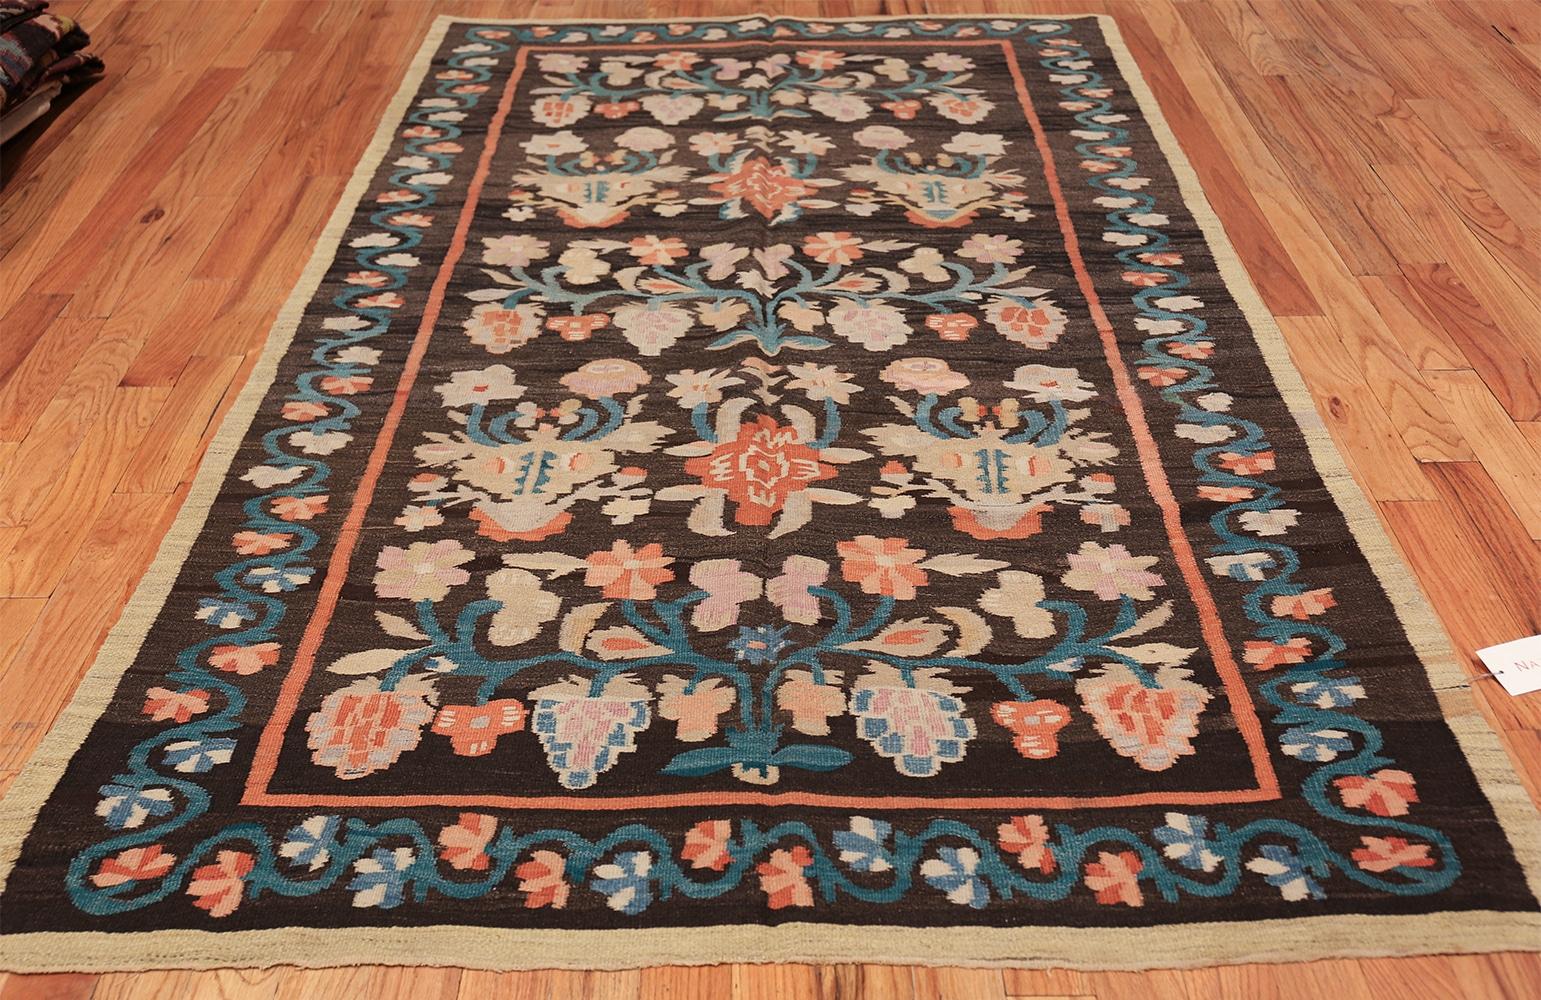 Antique Bessarabian Kilim rugs, Origin: Turkey, circa 1900. Size: 5 ft 2 in x 9 ft (1.57 m x 2.74 m). 

A lovely array of floral sprays in soft green-blue, mauve, pale apricot, and soft red floats happily across the deep chocolate ground of this